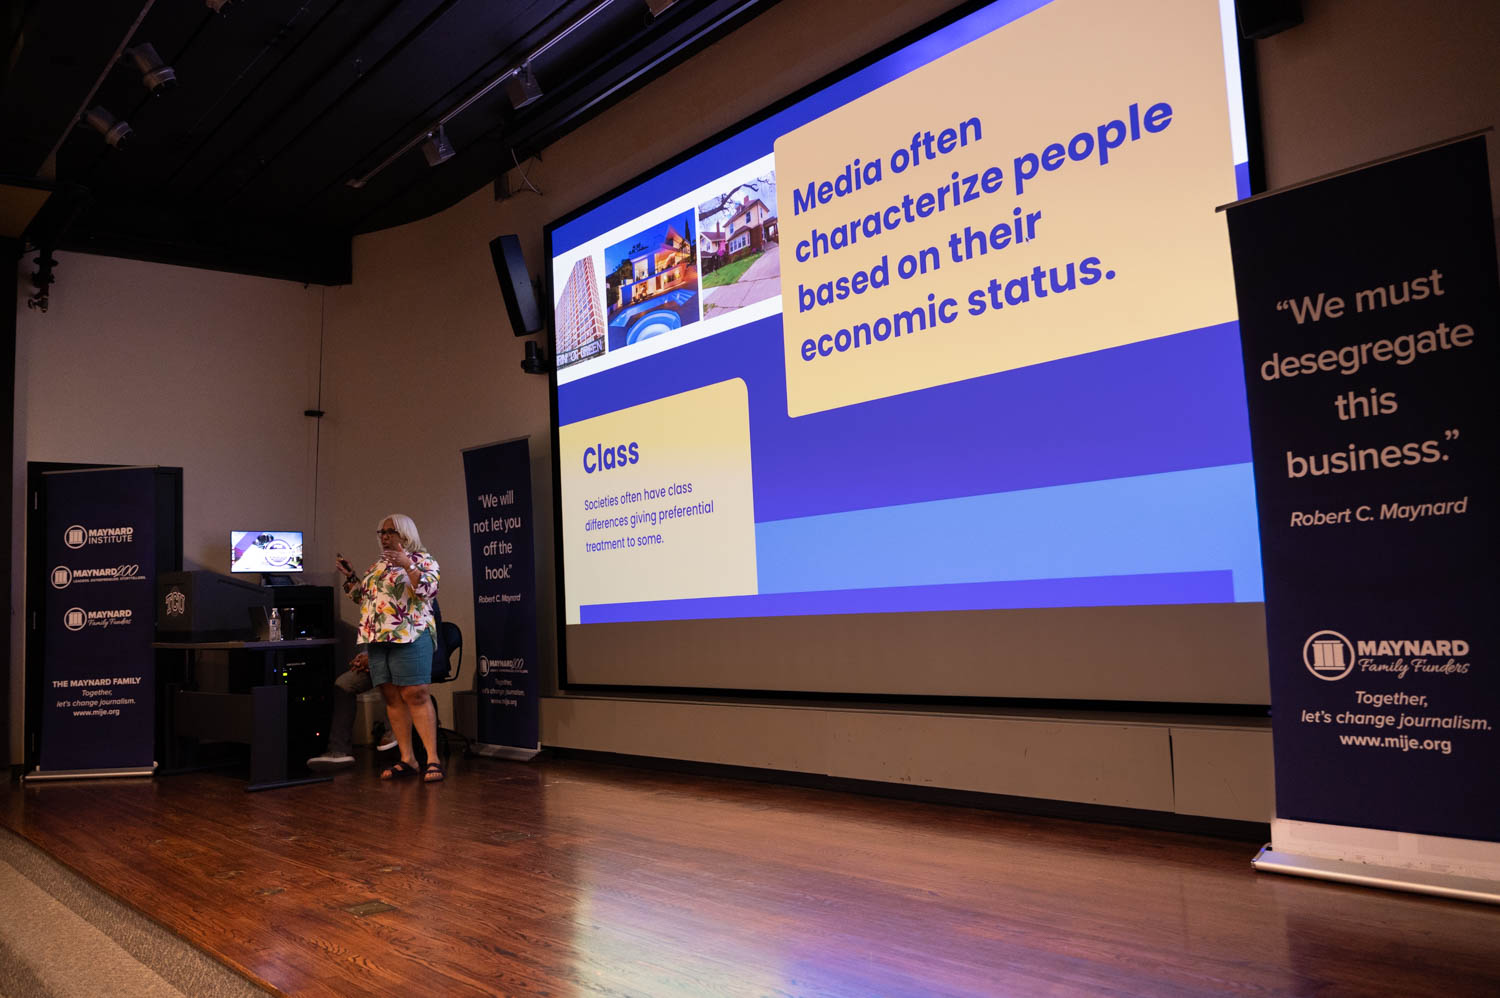 A professor speaks on stage in front of a screen with the text "Media often characterize people based on their economic status."